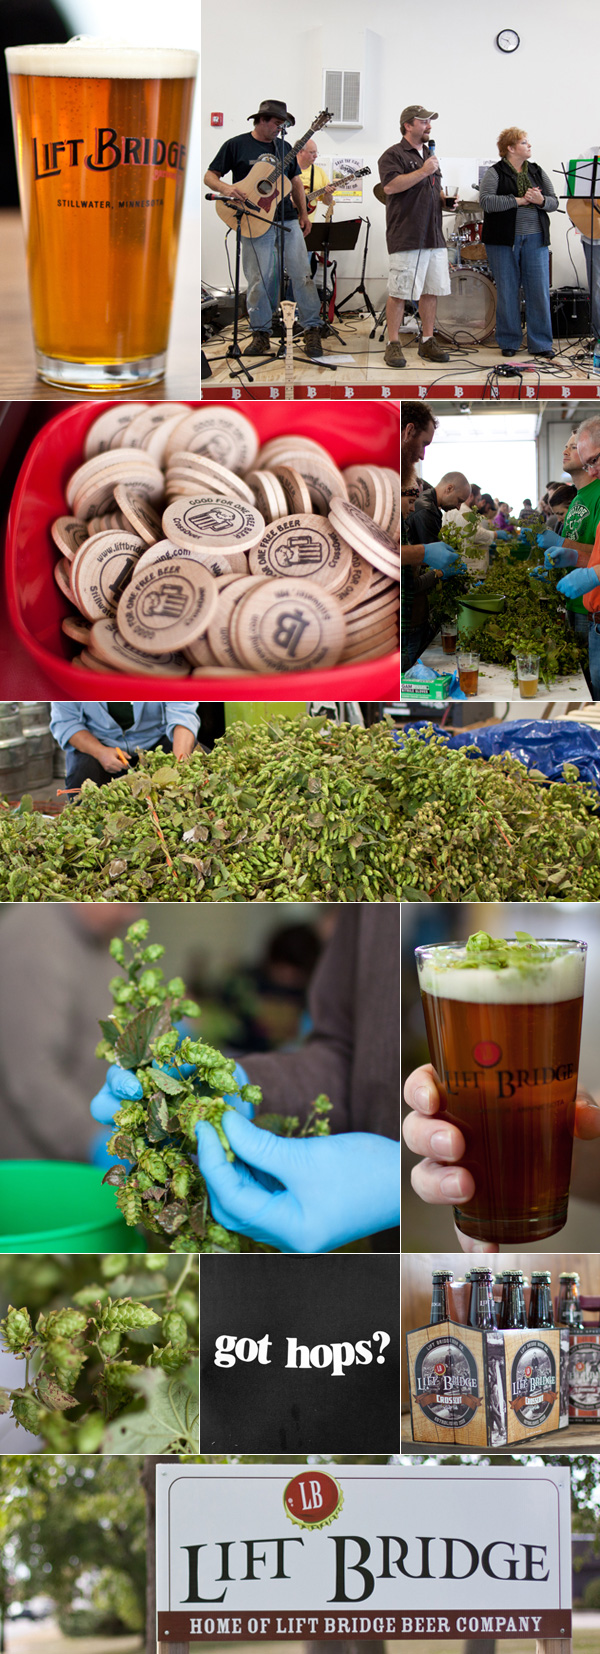 hops and beers from the Lift Bridge hops festival